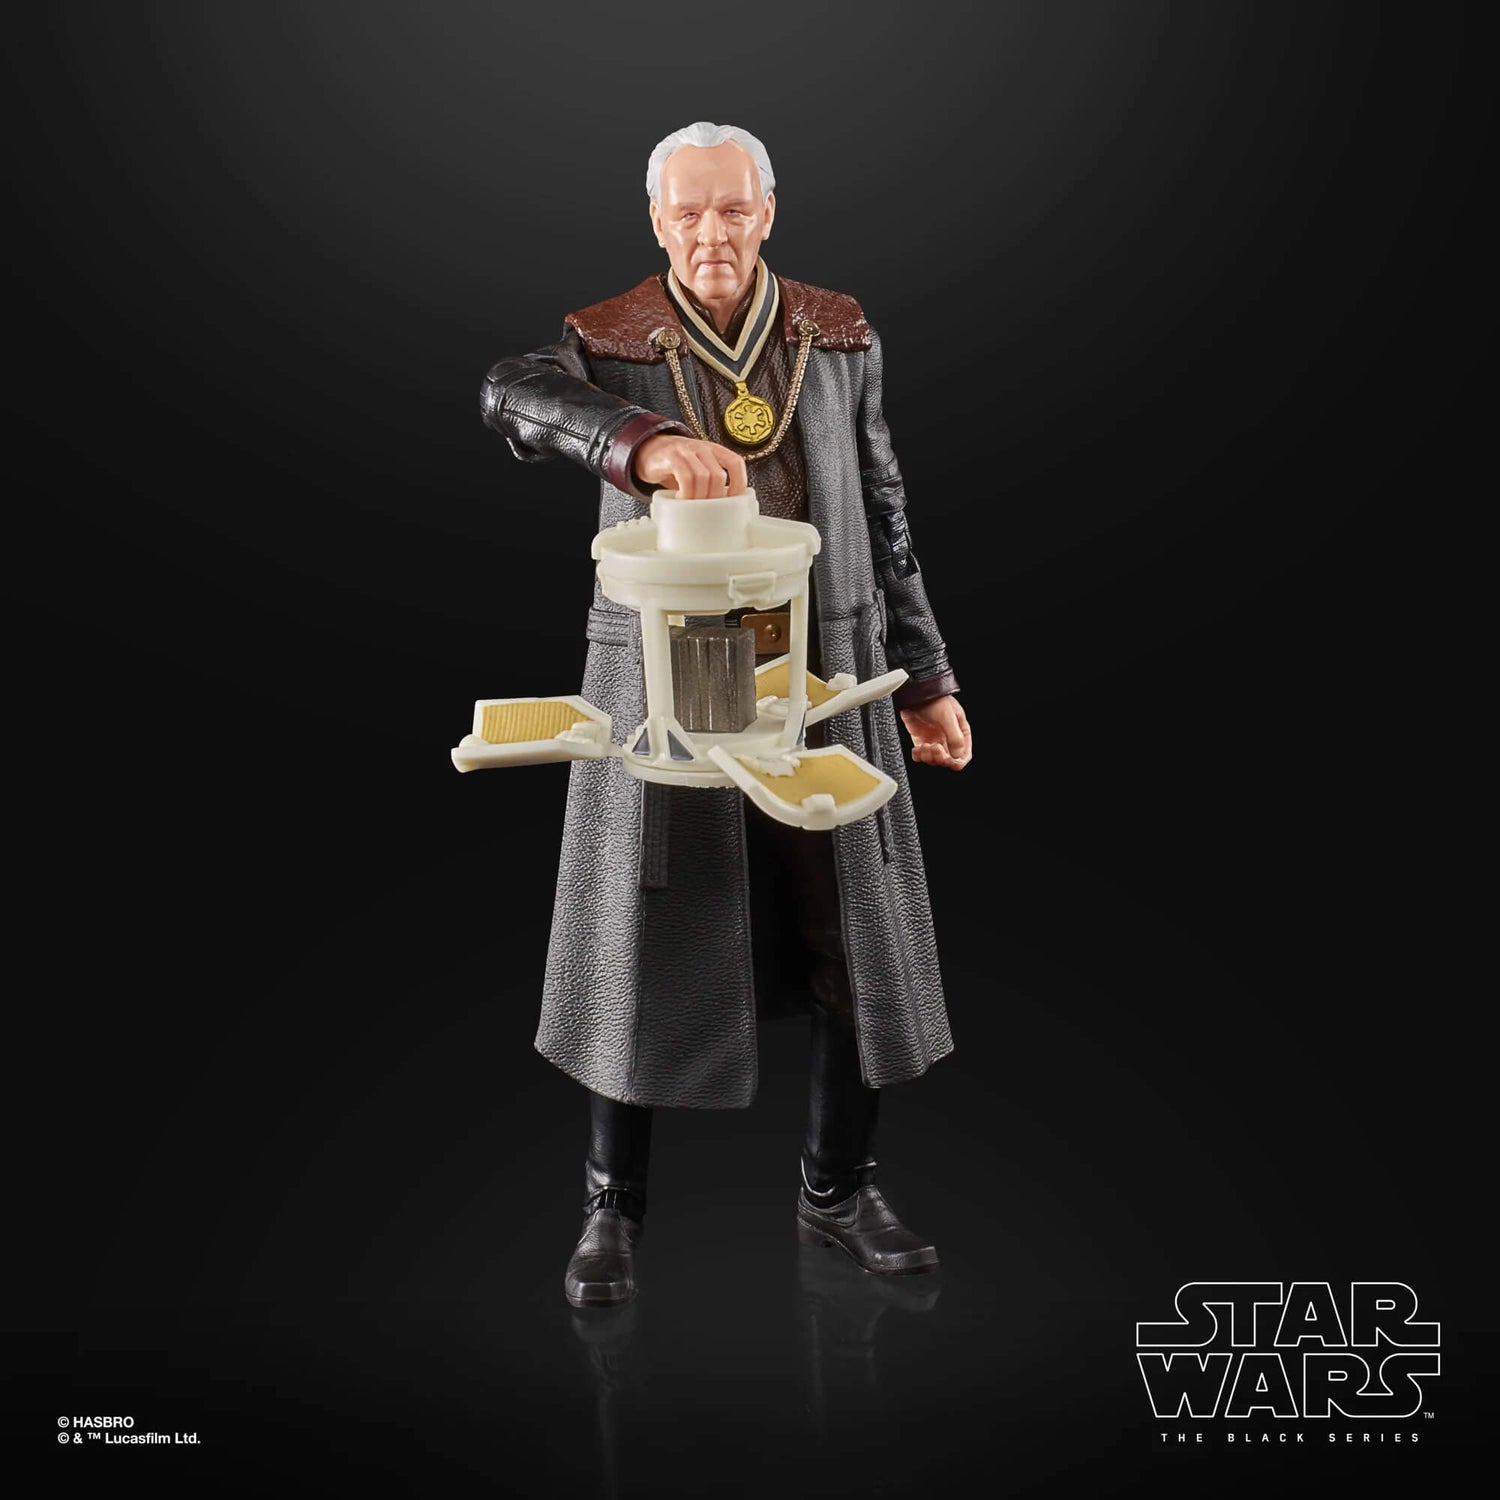 Hasbro Disney+ Star Wars The Mandoalorian The Client (Werner Herzog) action figure with accessories